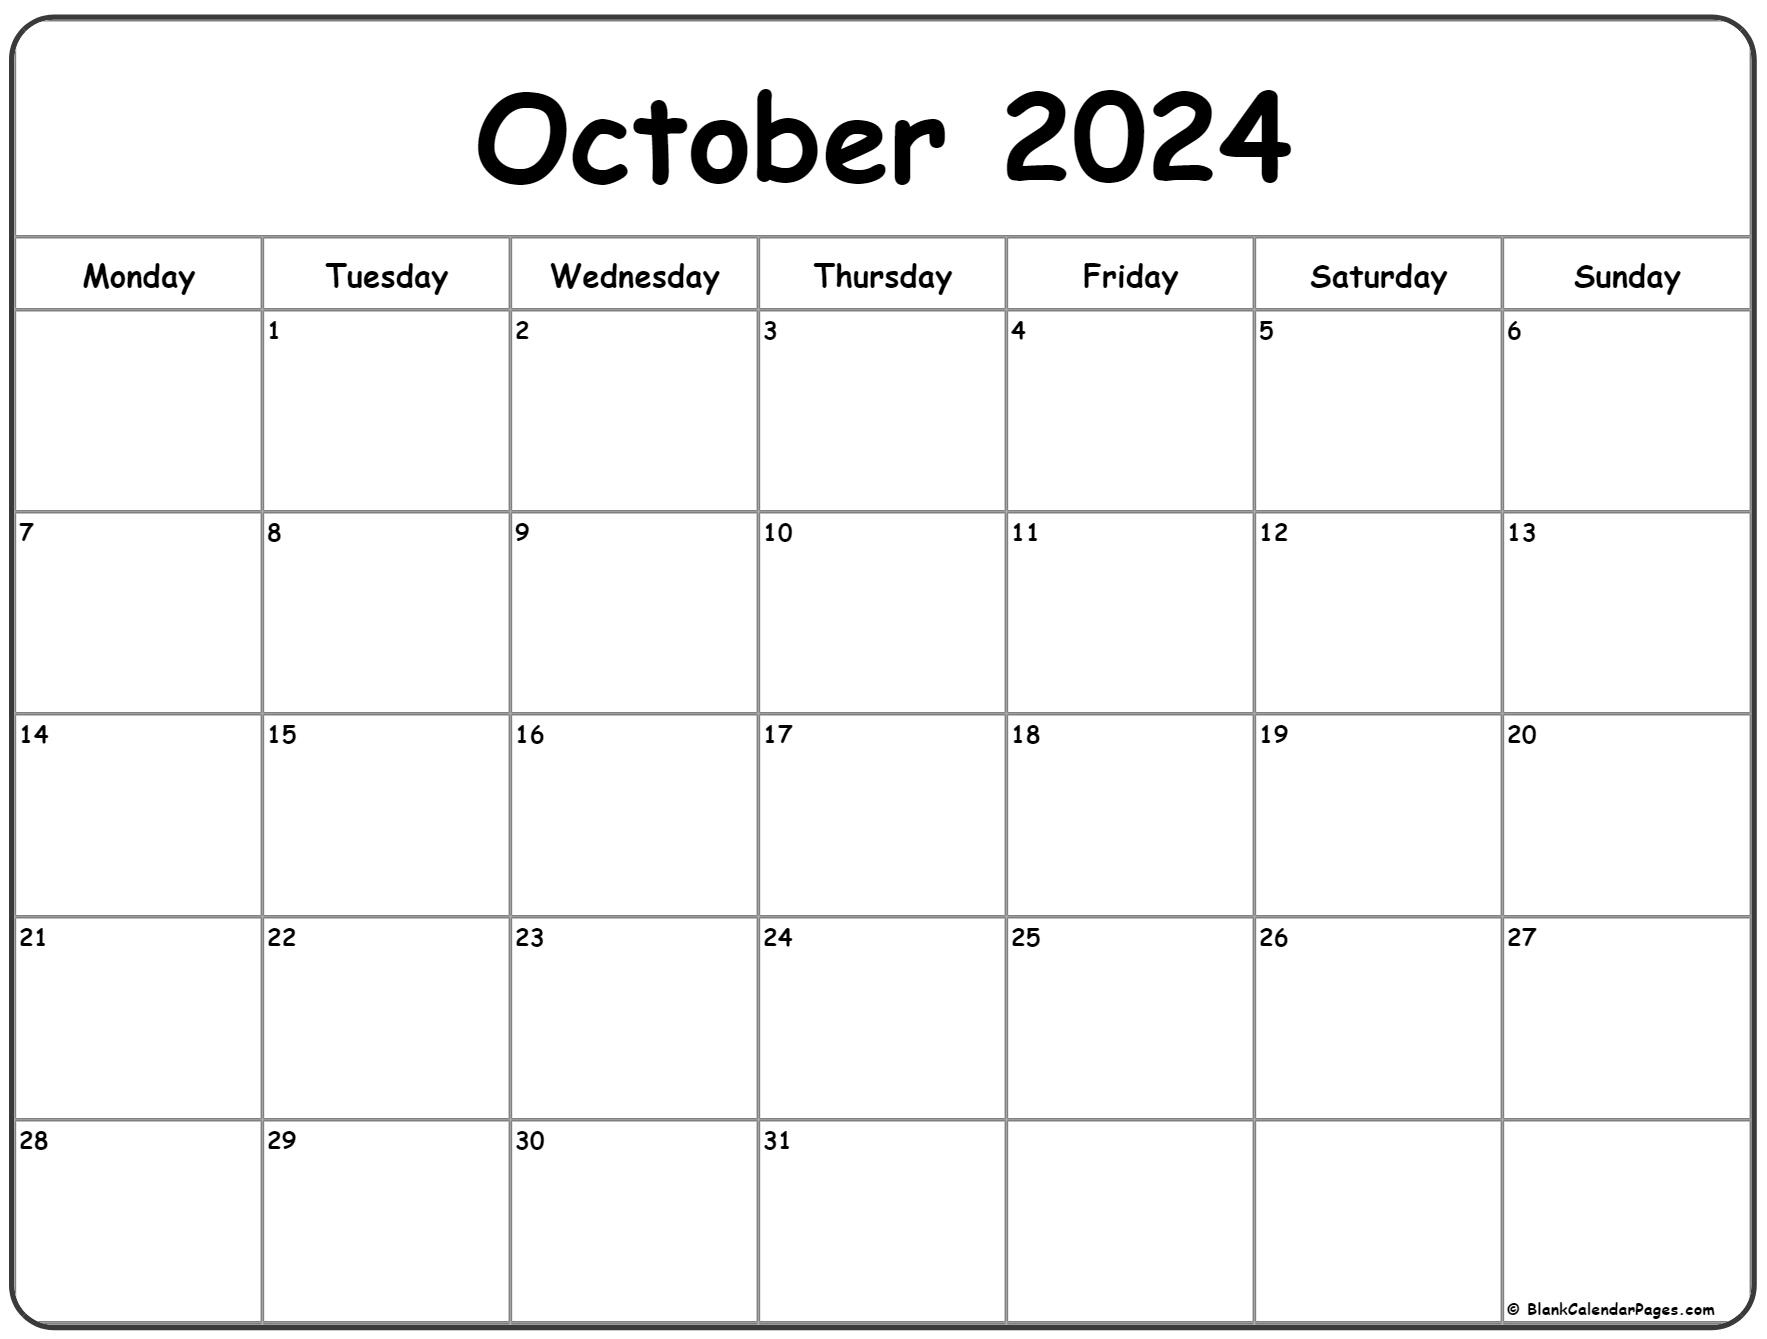 October 2024 Monday Calendar | Monday To Sunday with Free Printable Appointment Calendar October 2024